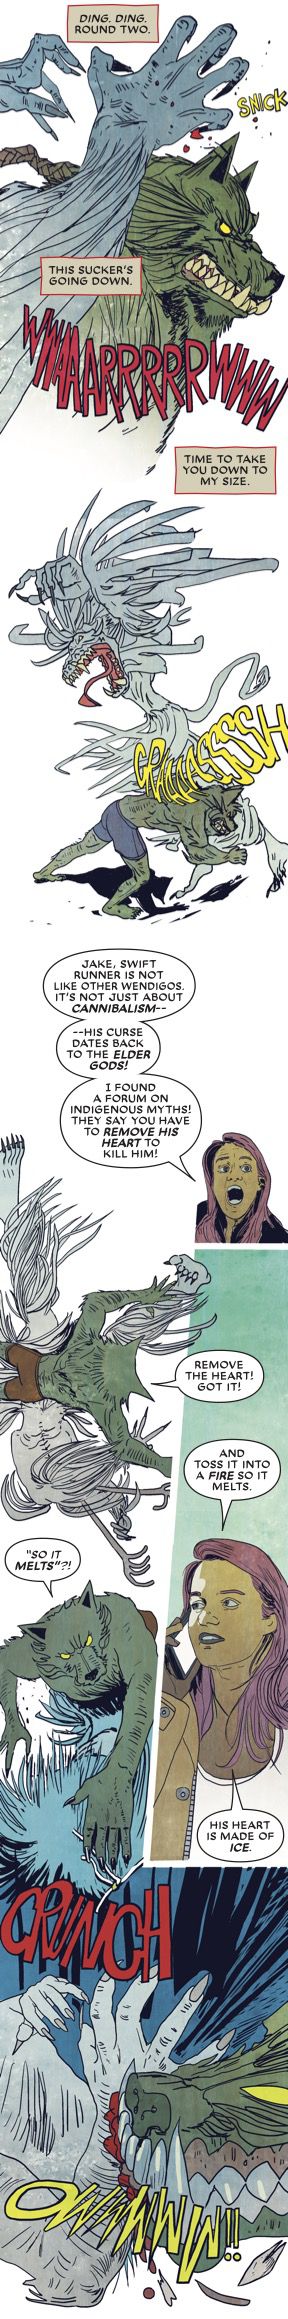 Molly discovers the Wendingo’s weakness in Marvel Infinity’s Werewolf by Night.